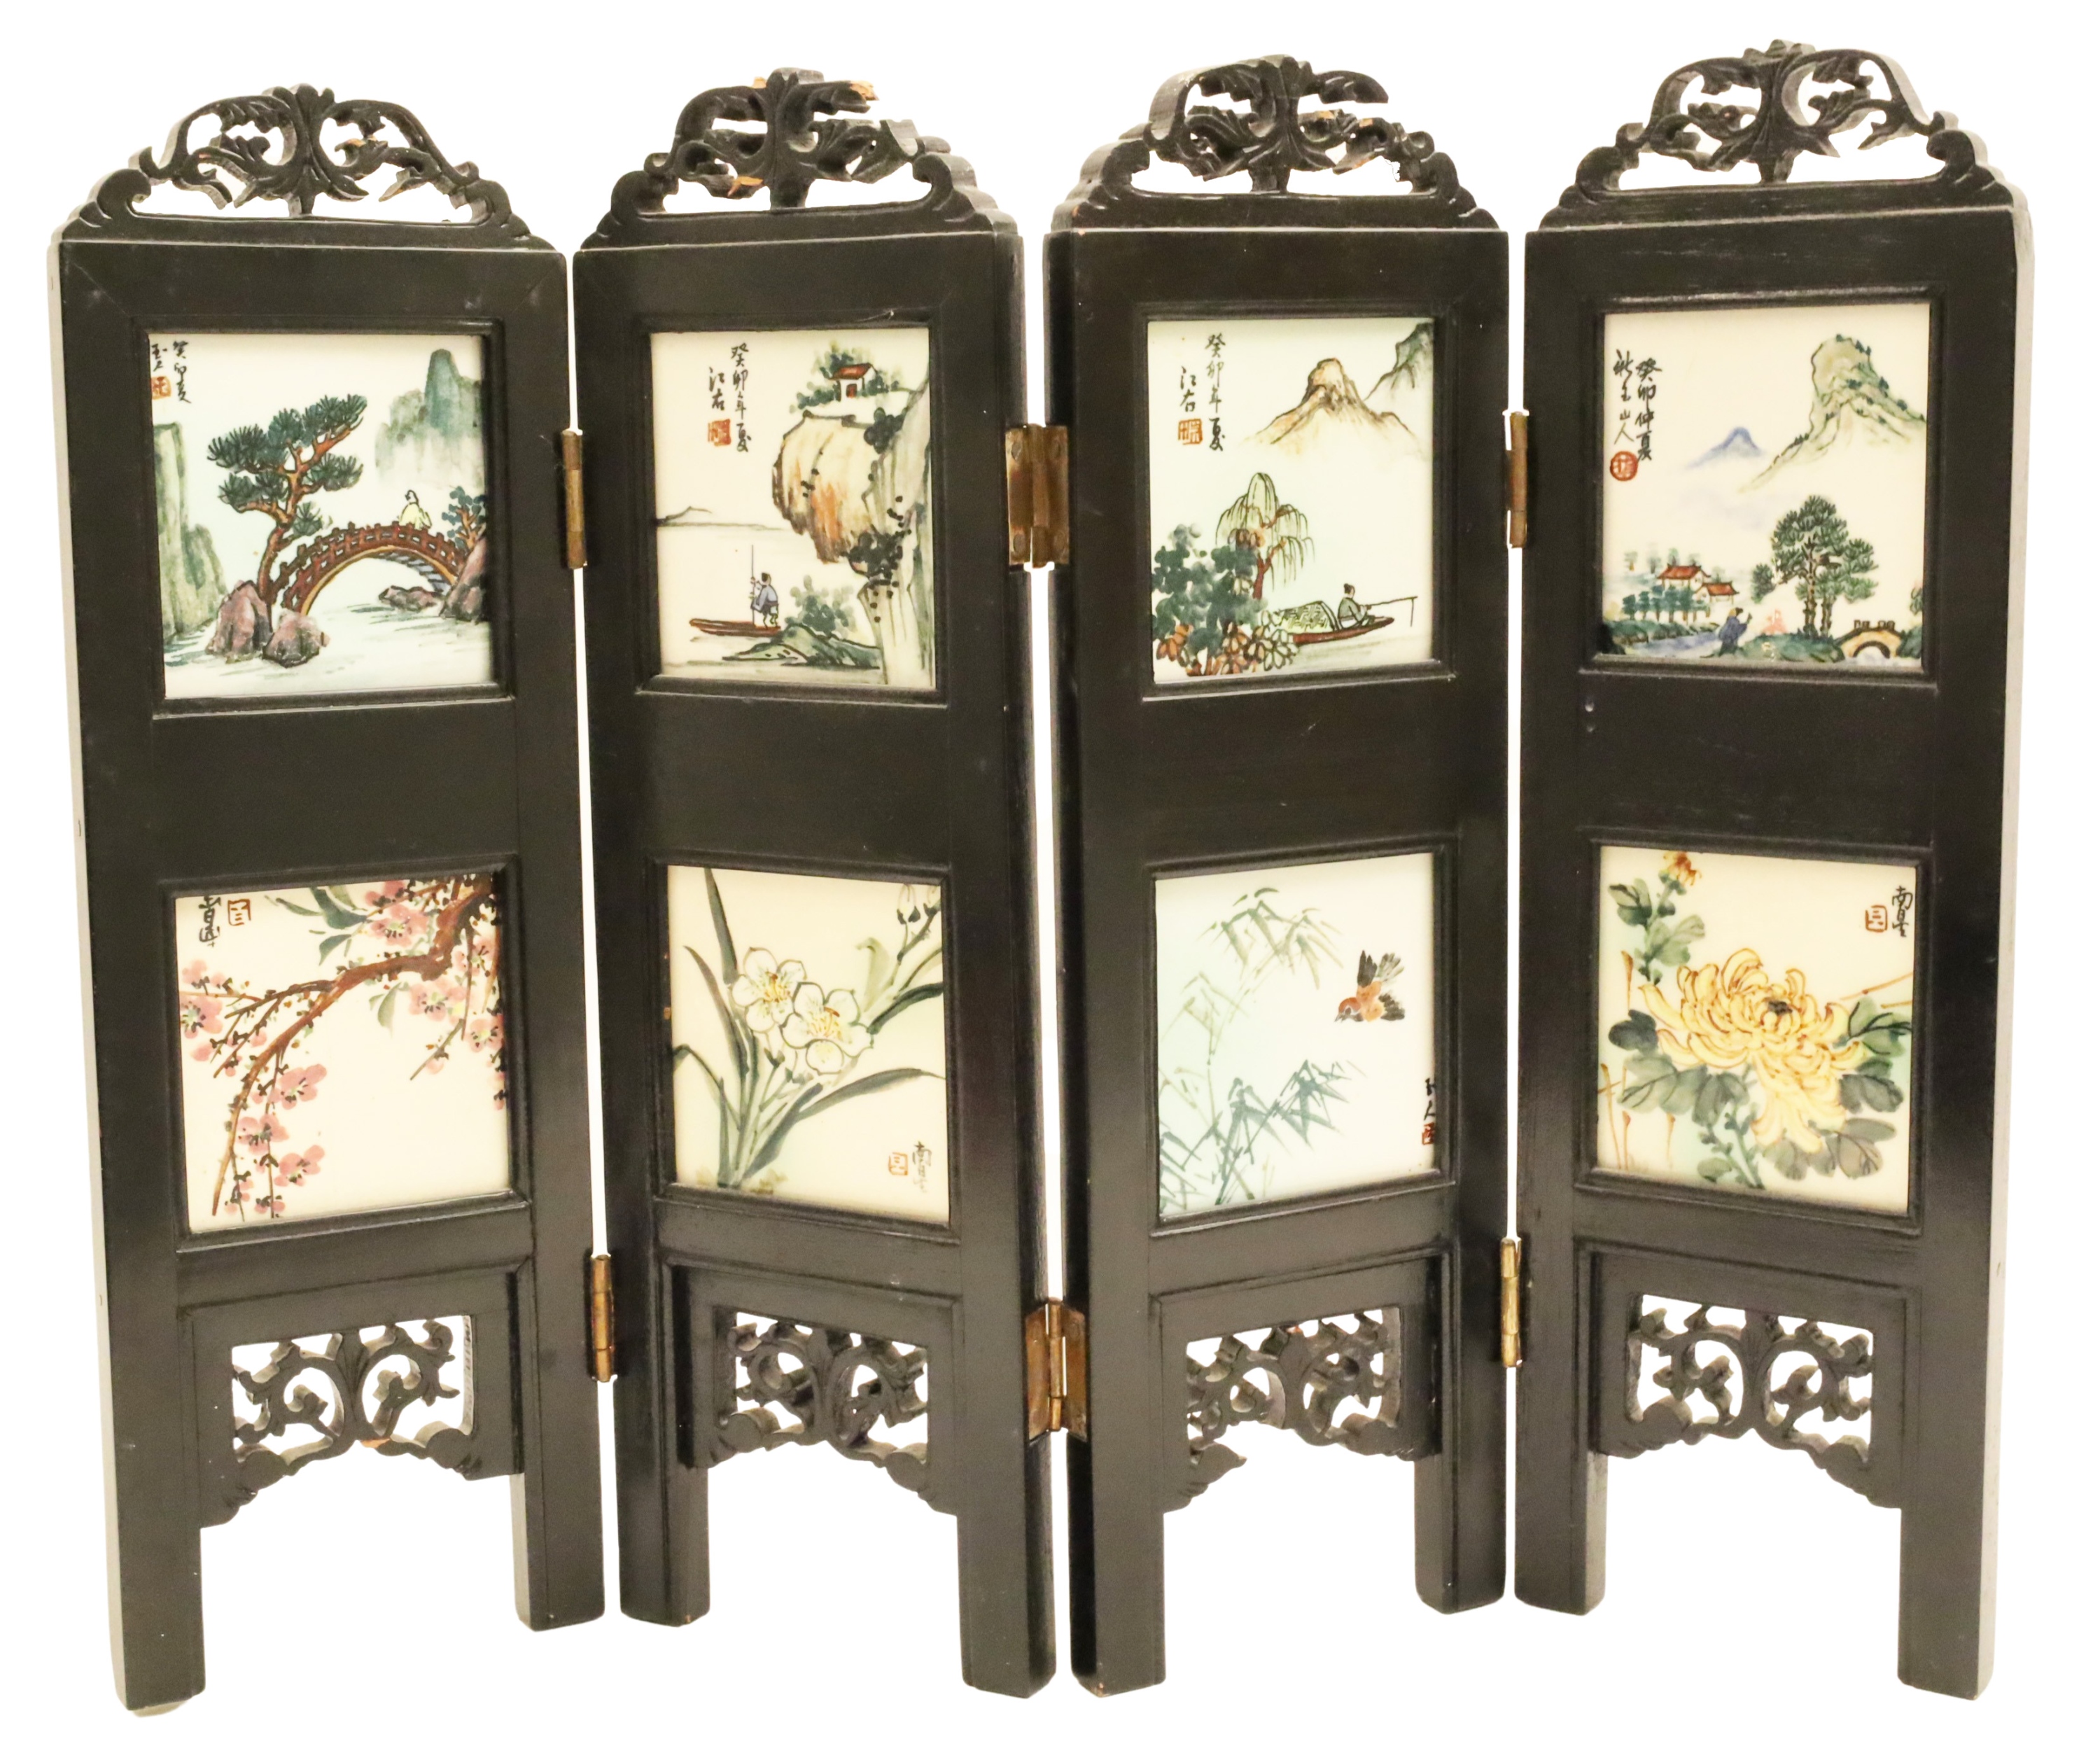 4 PANEL CHINESE PORCELAIN INLAID